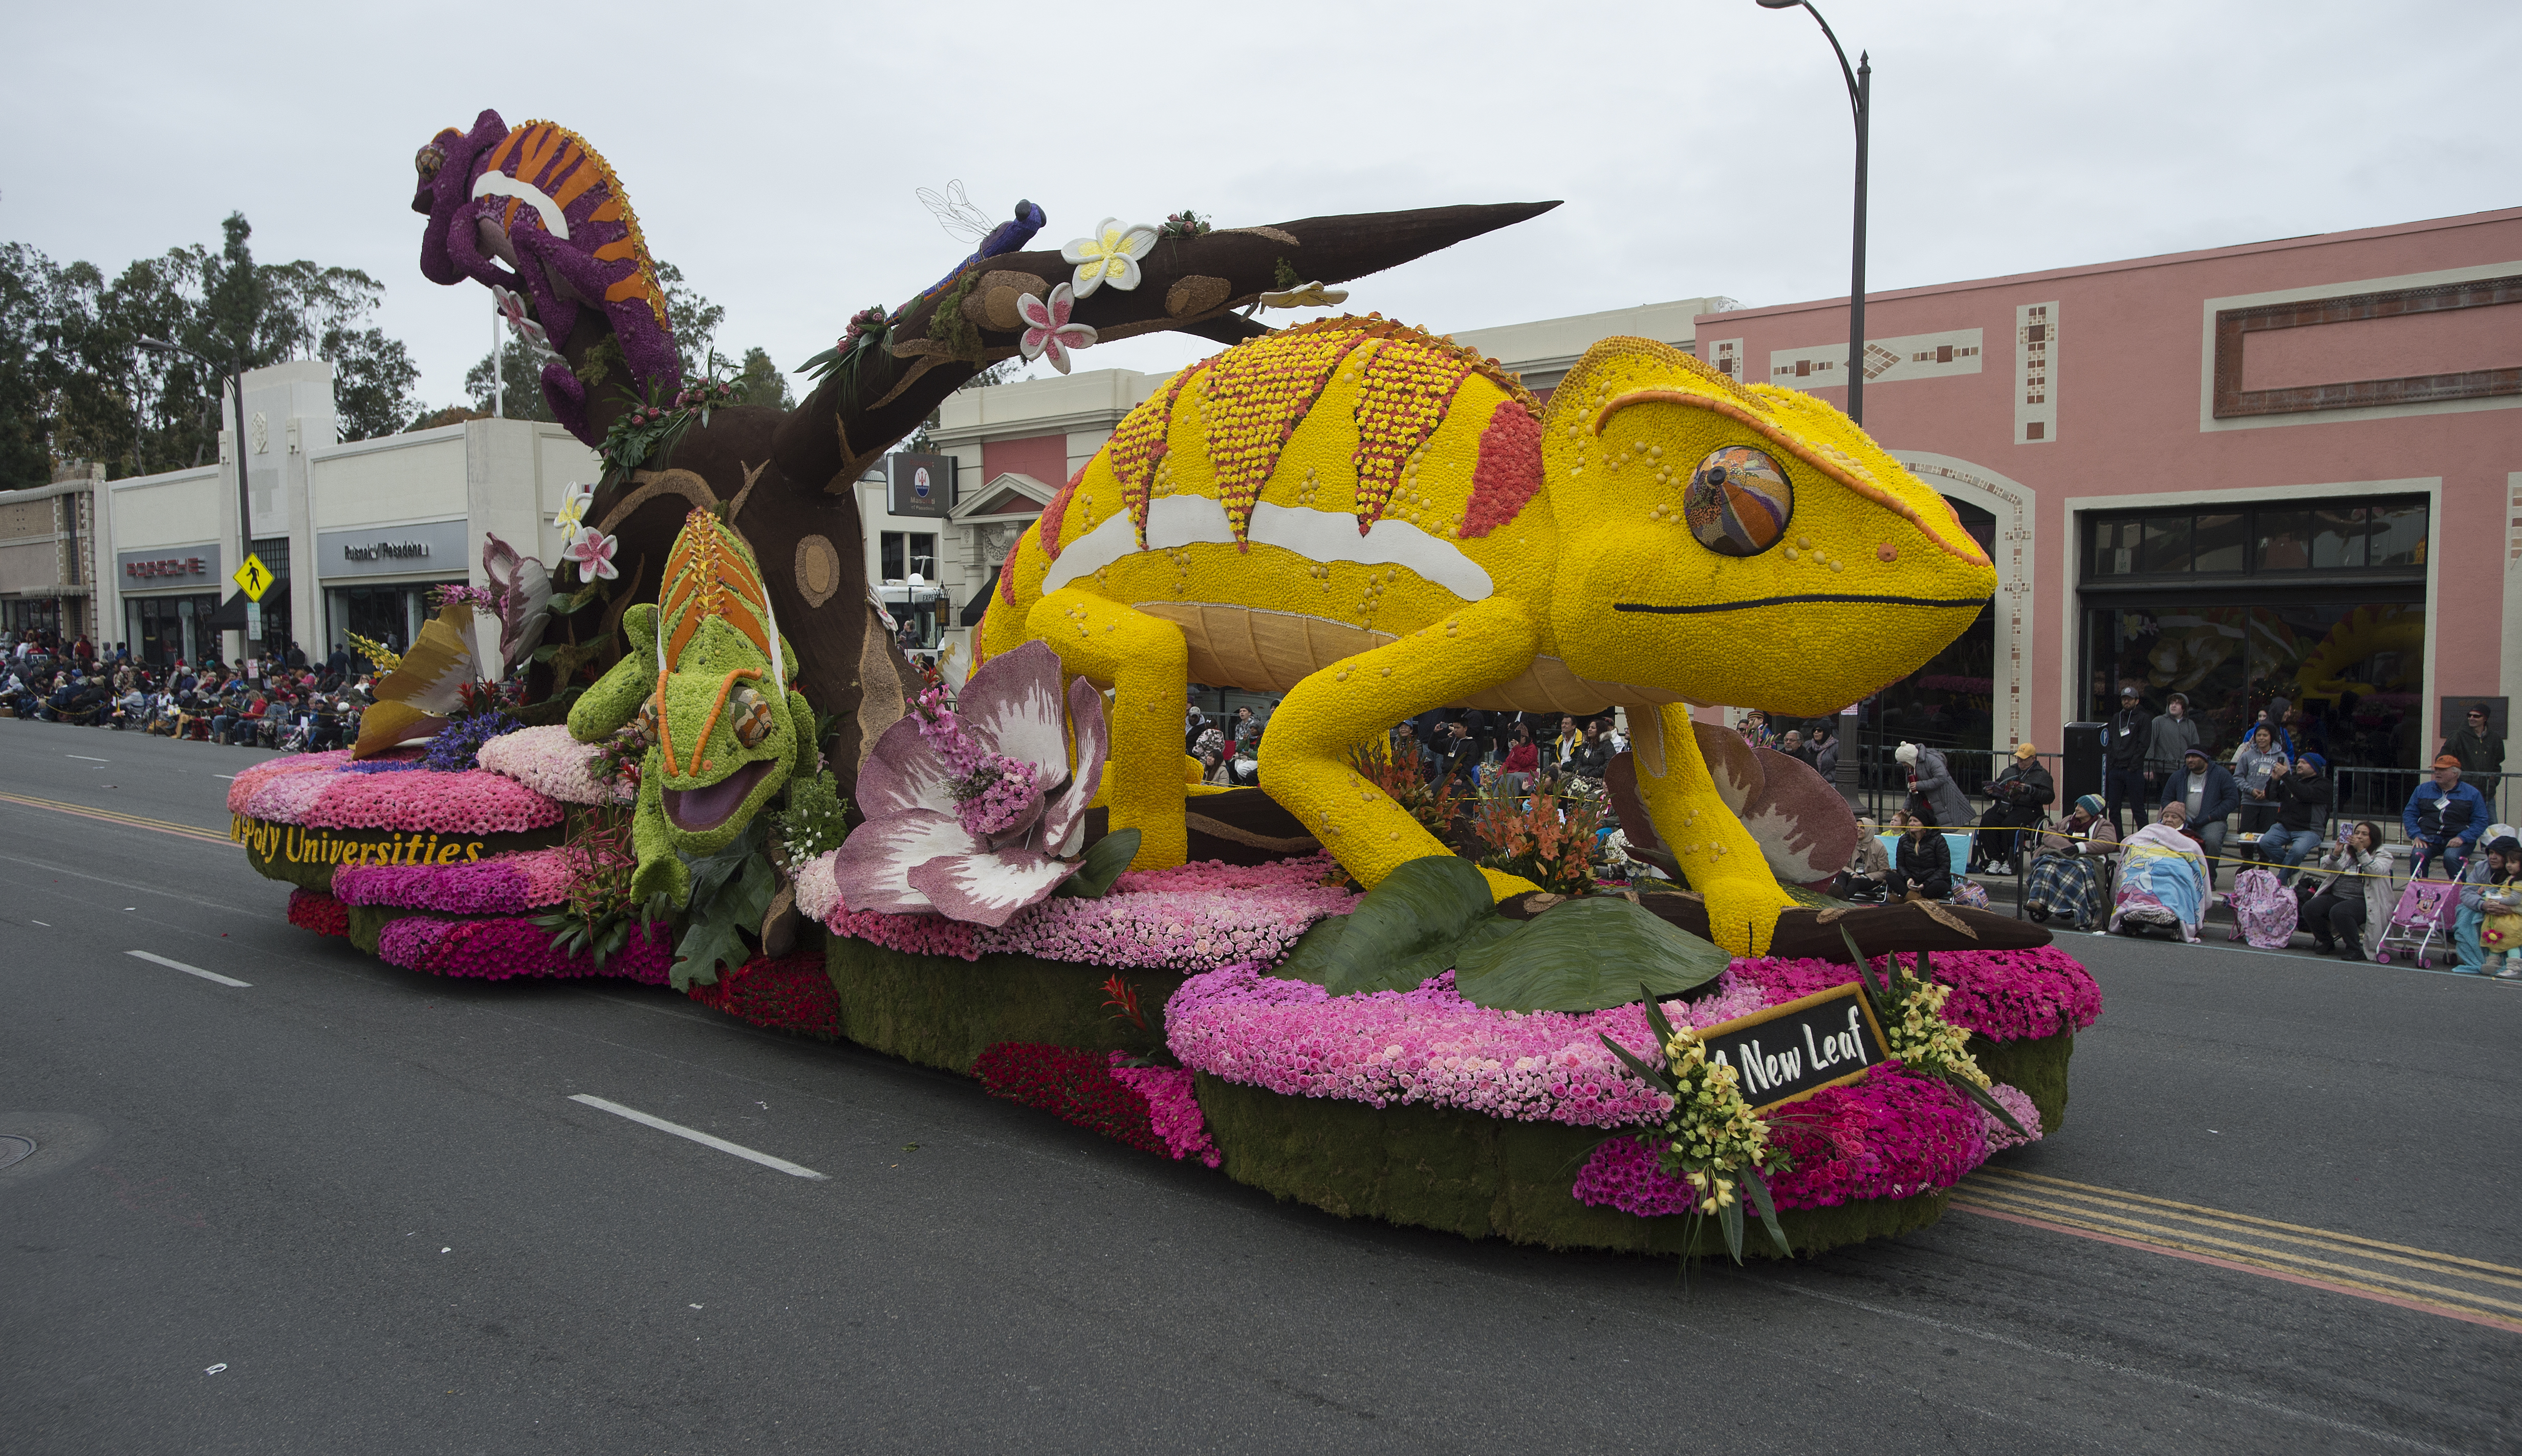 The Cal Poly Universities Rose Float, A New Leaf, makes its way down Colorado Blvd in  Pasadena during the 2017 Rose Parade January 2, 2017. Photo by Tom Zasadzinski, Cal Poly Pomona